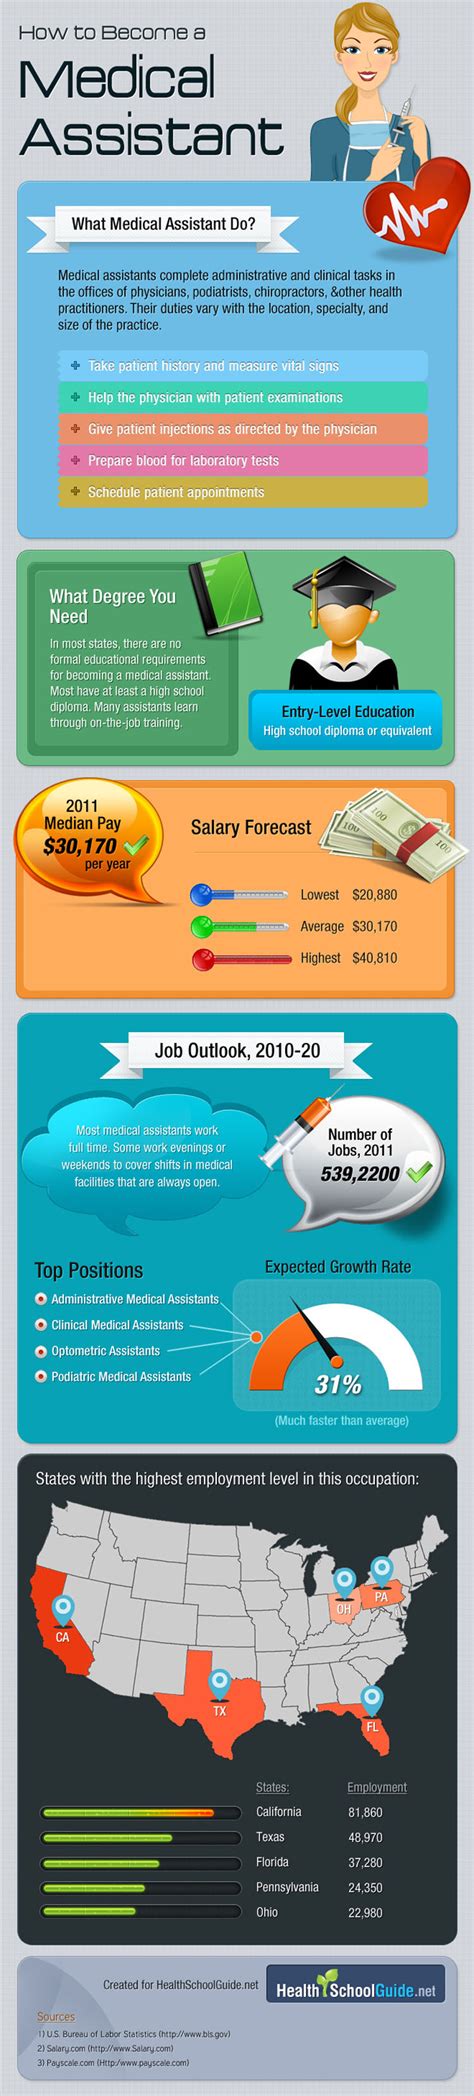 How To Become A Medical Assistant Infographic